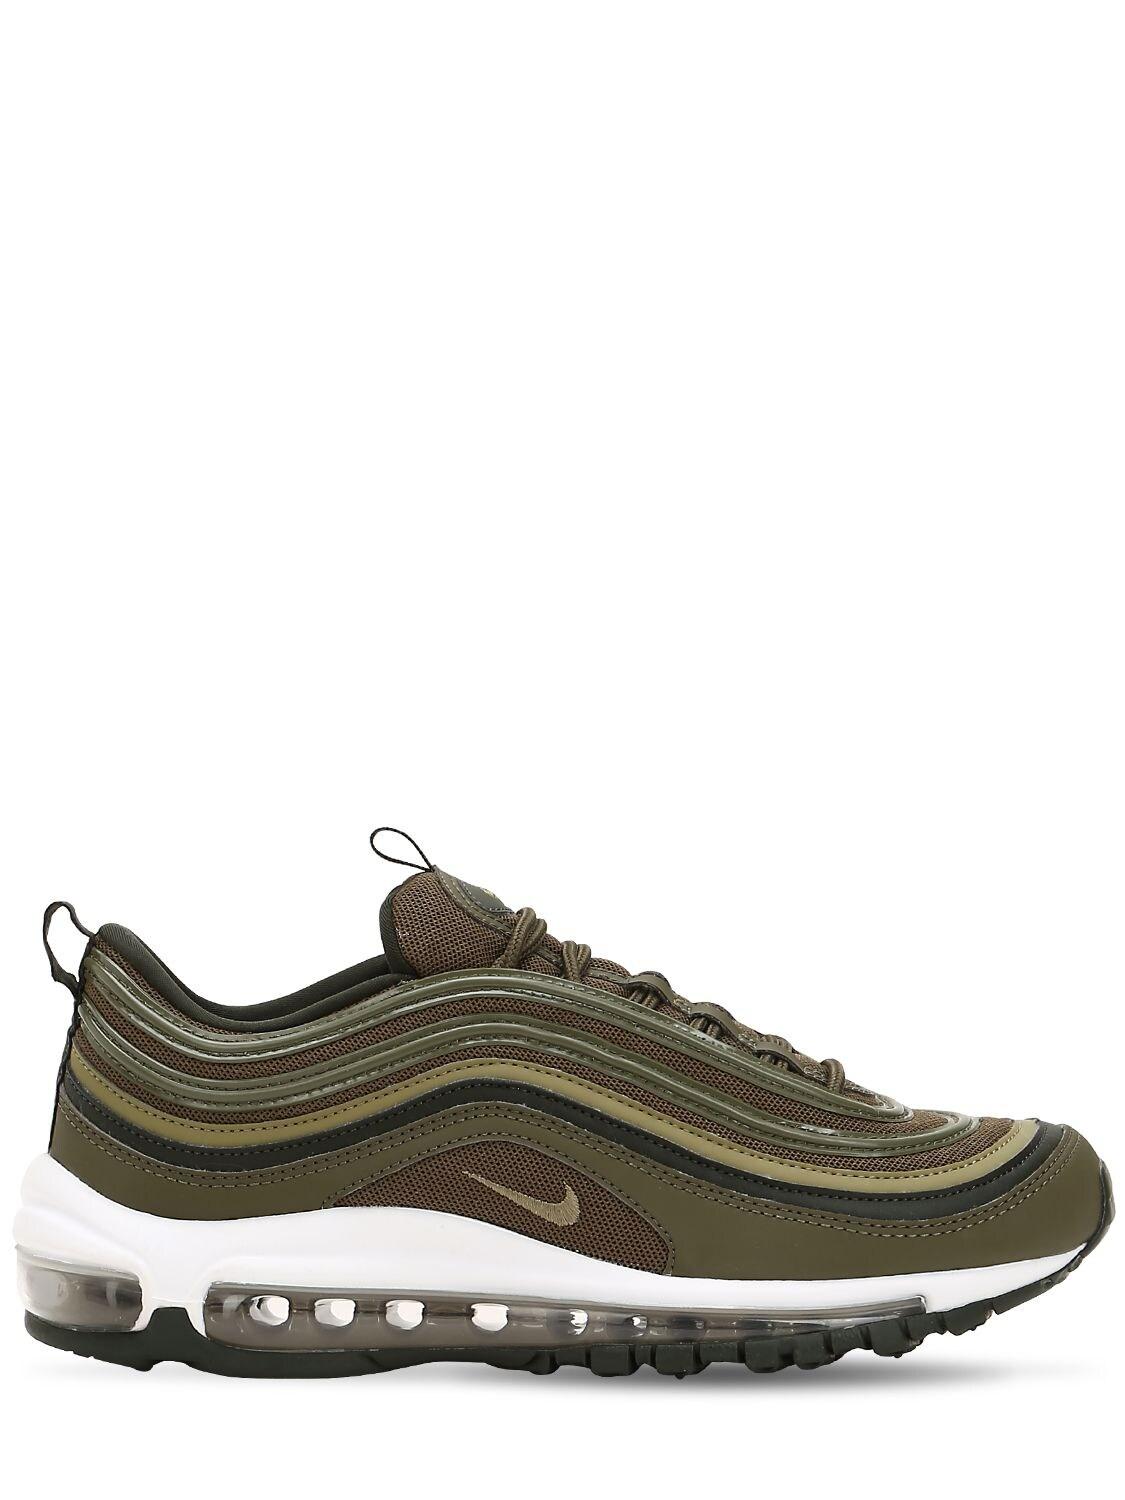 Nike Air Max 97 Sneakers in Olive Green (Green) - Lyst